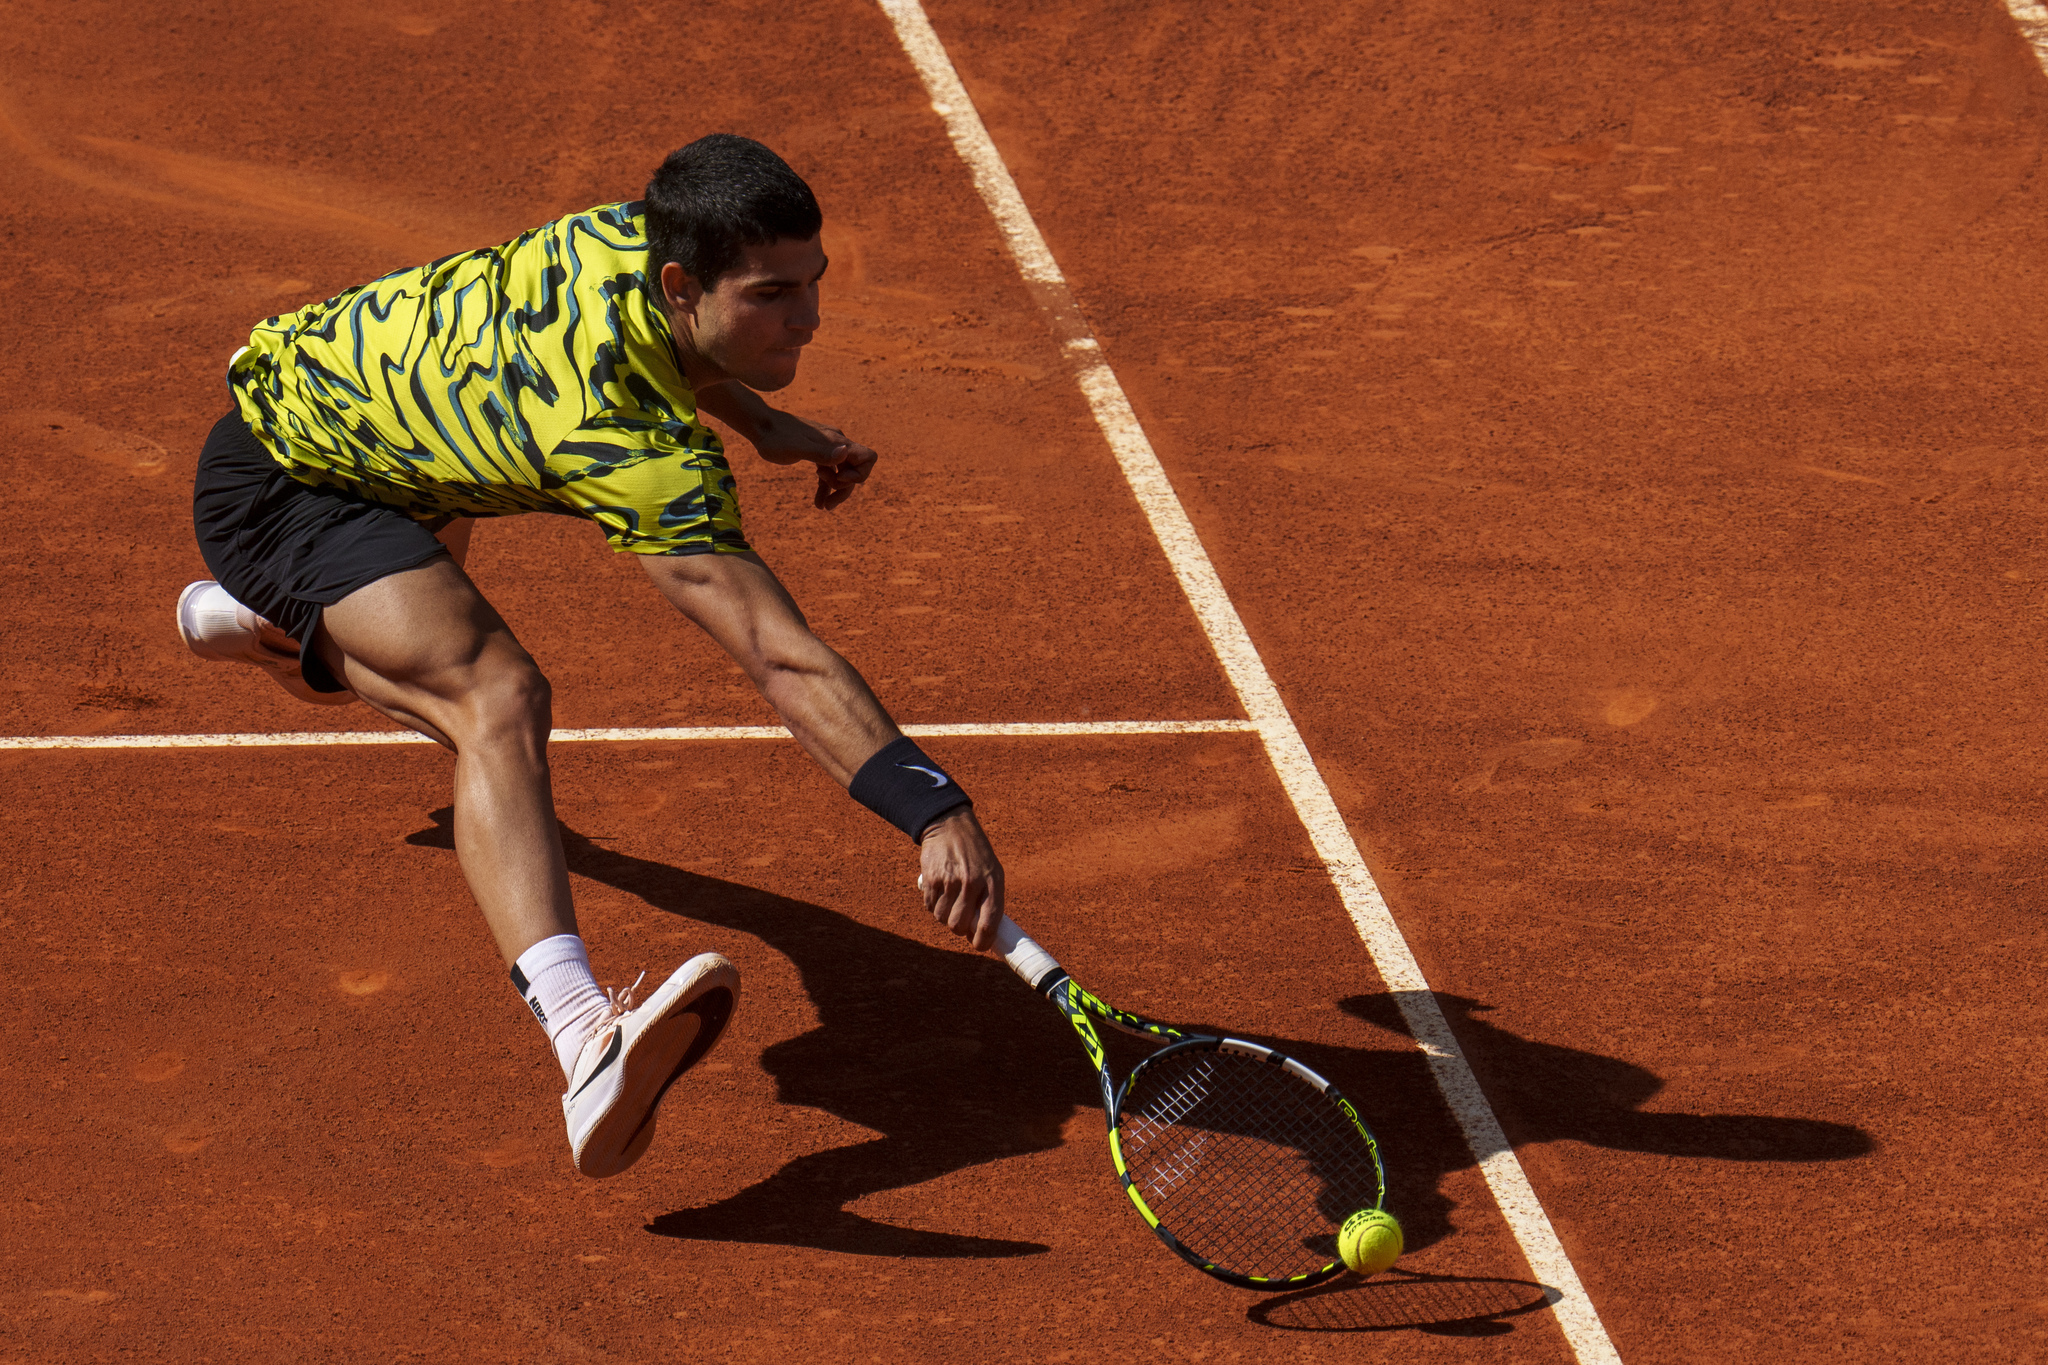 Carlos lt;HIT gt;Alcaraz lt;/HIT gt; of Spain returns the ball against Russia's Karen Kachanov during their match at the Madrid Open tennis tournament in Madrid, Spain, Wednesday, May 3, 2023. (AP Photo/Manu Fernandez)